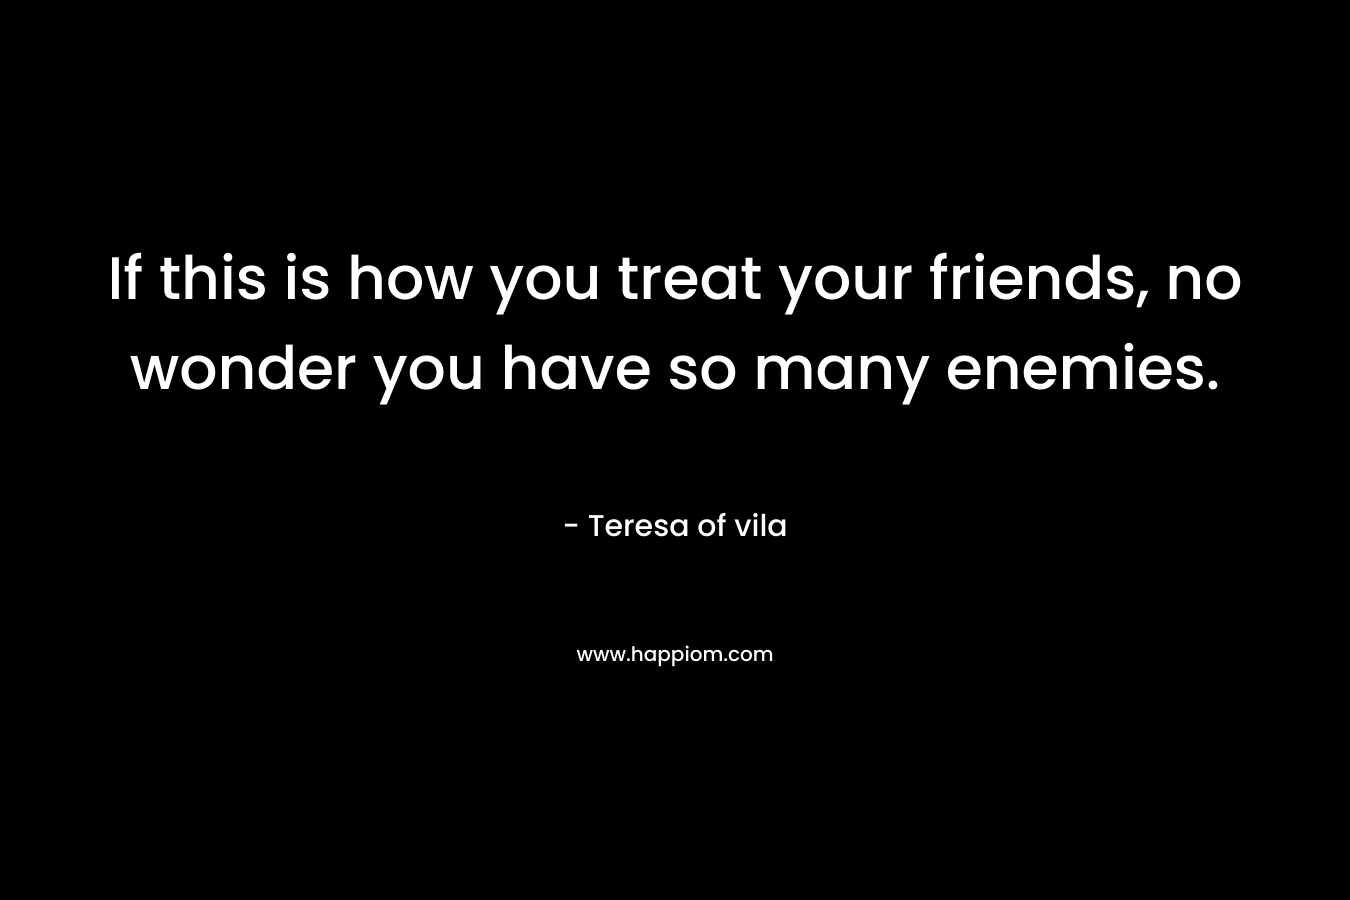 If this is how you treat your friends, no wonder you have so many enemies. – Teresa of vila